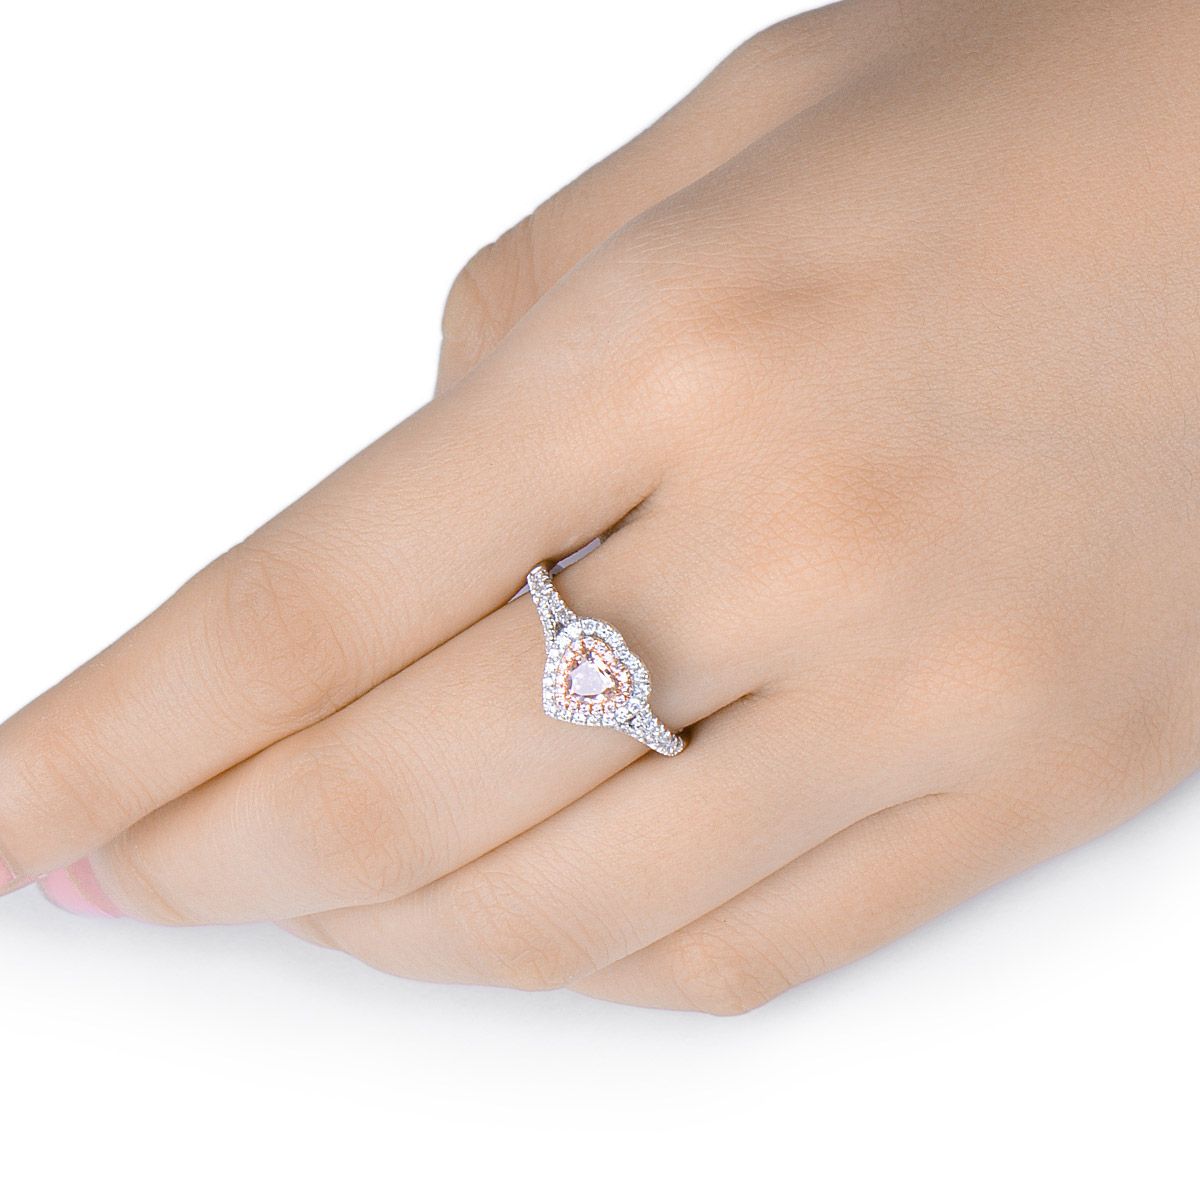 Fancy Brownish Pink Diamond Ring, 0.37 Ct. (0.76 Ct. TW), Heart shape, GIA Certified, 2175388920